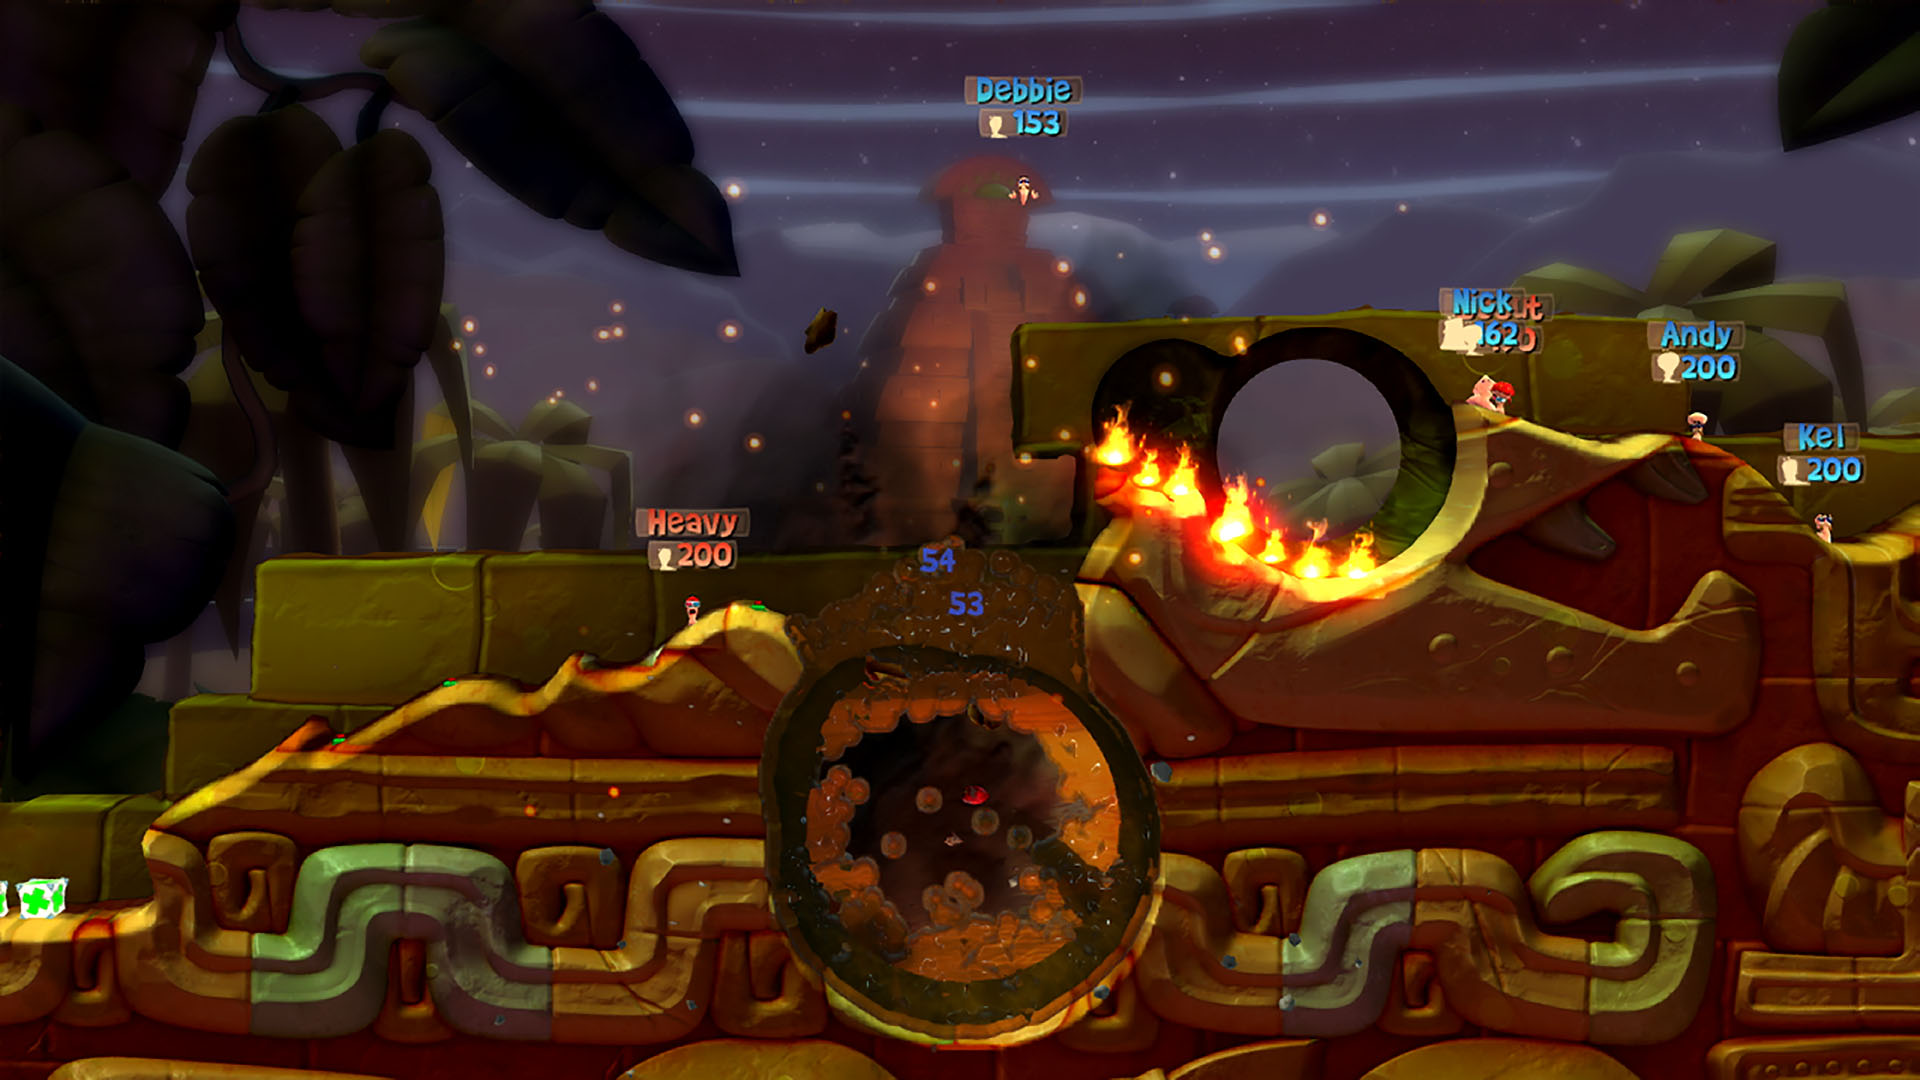 Worms ps4. Worms Battlegrounds + worms w.m.d. Worms Battlegrounds (ps4). Worms Xbox one. Worms Battlegrounds Xbox one.